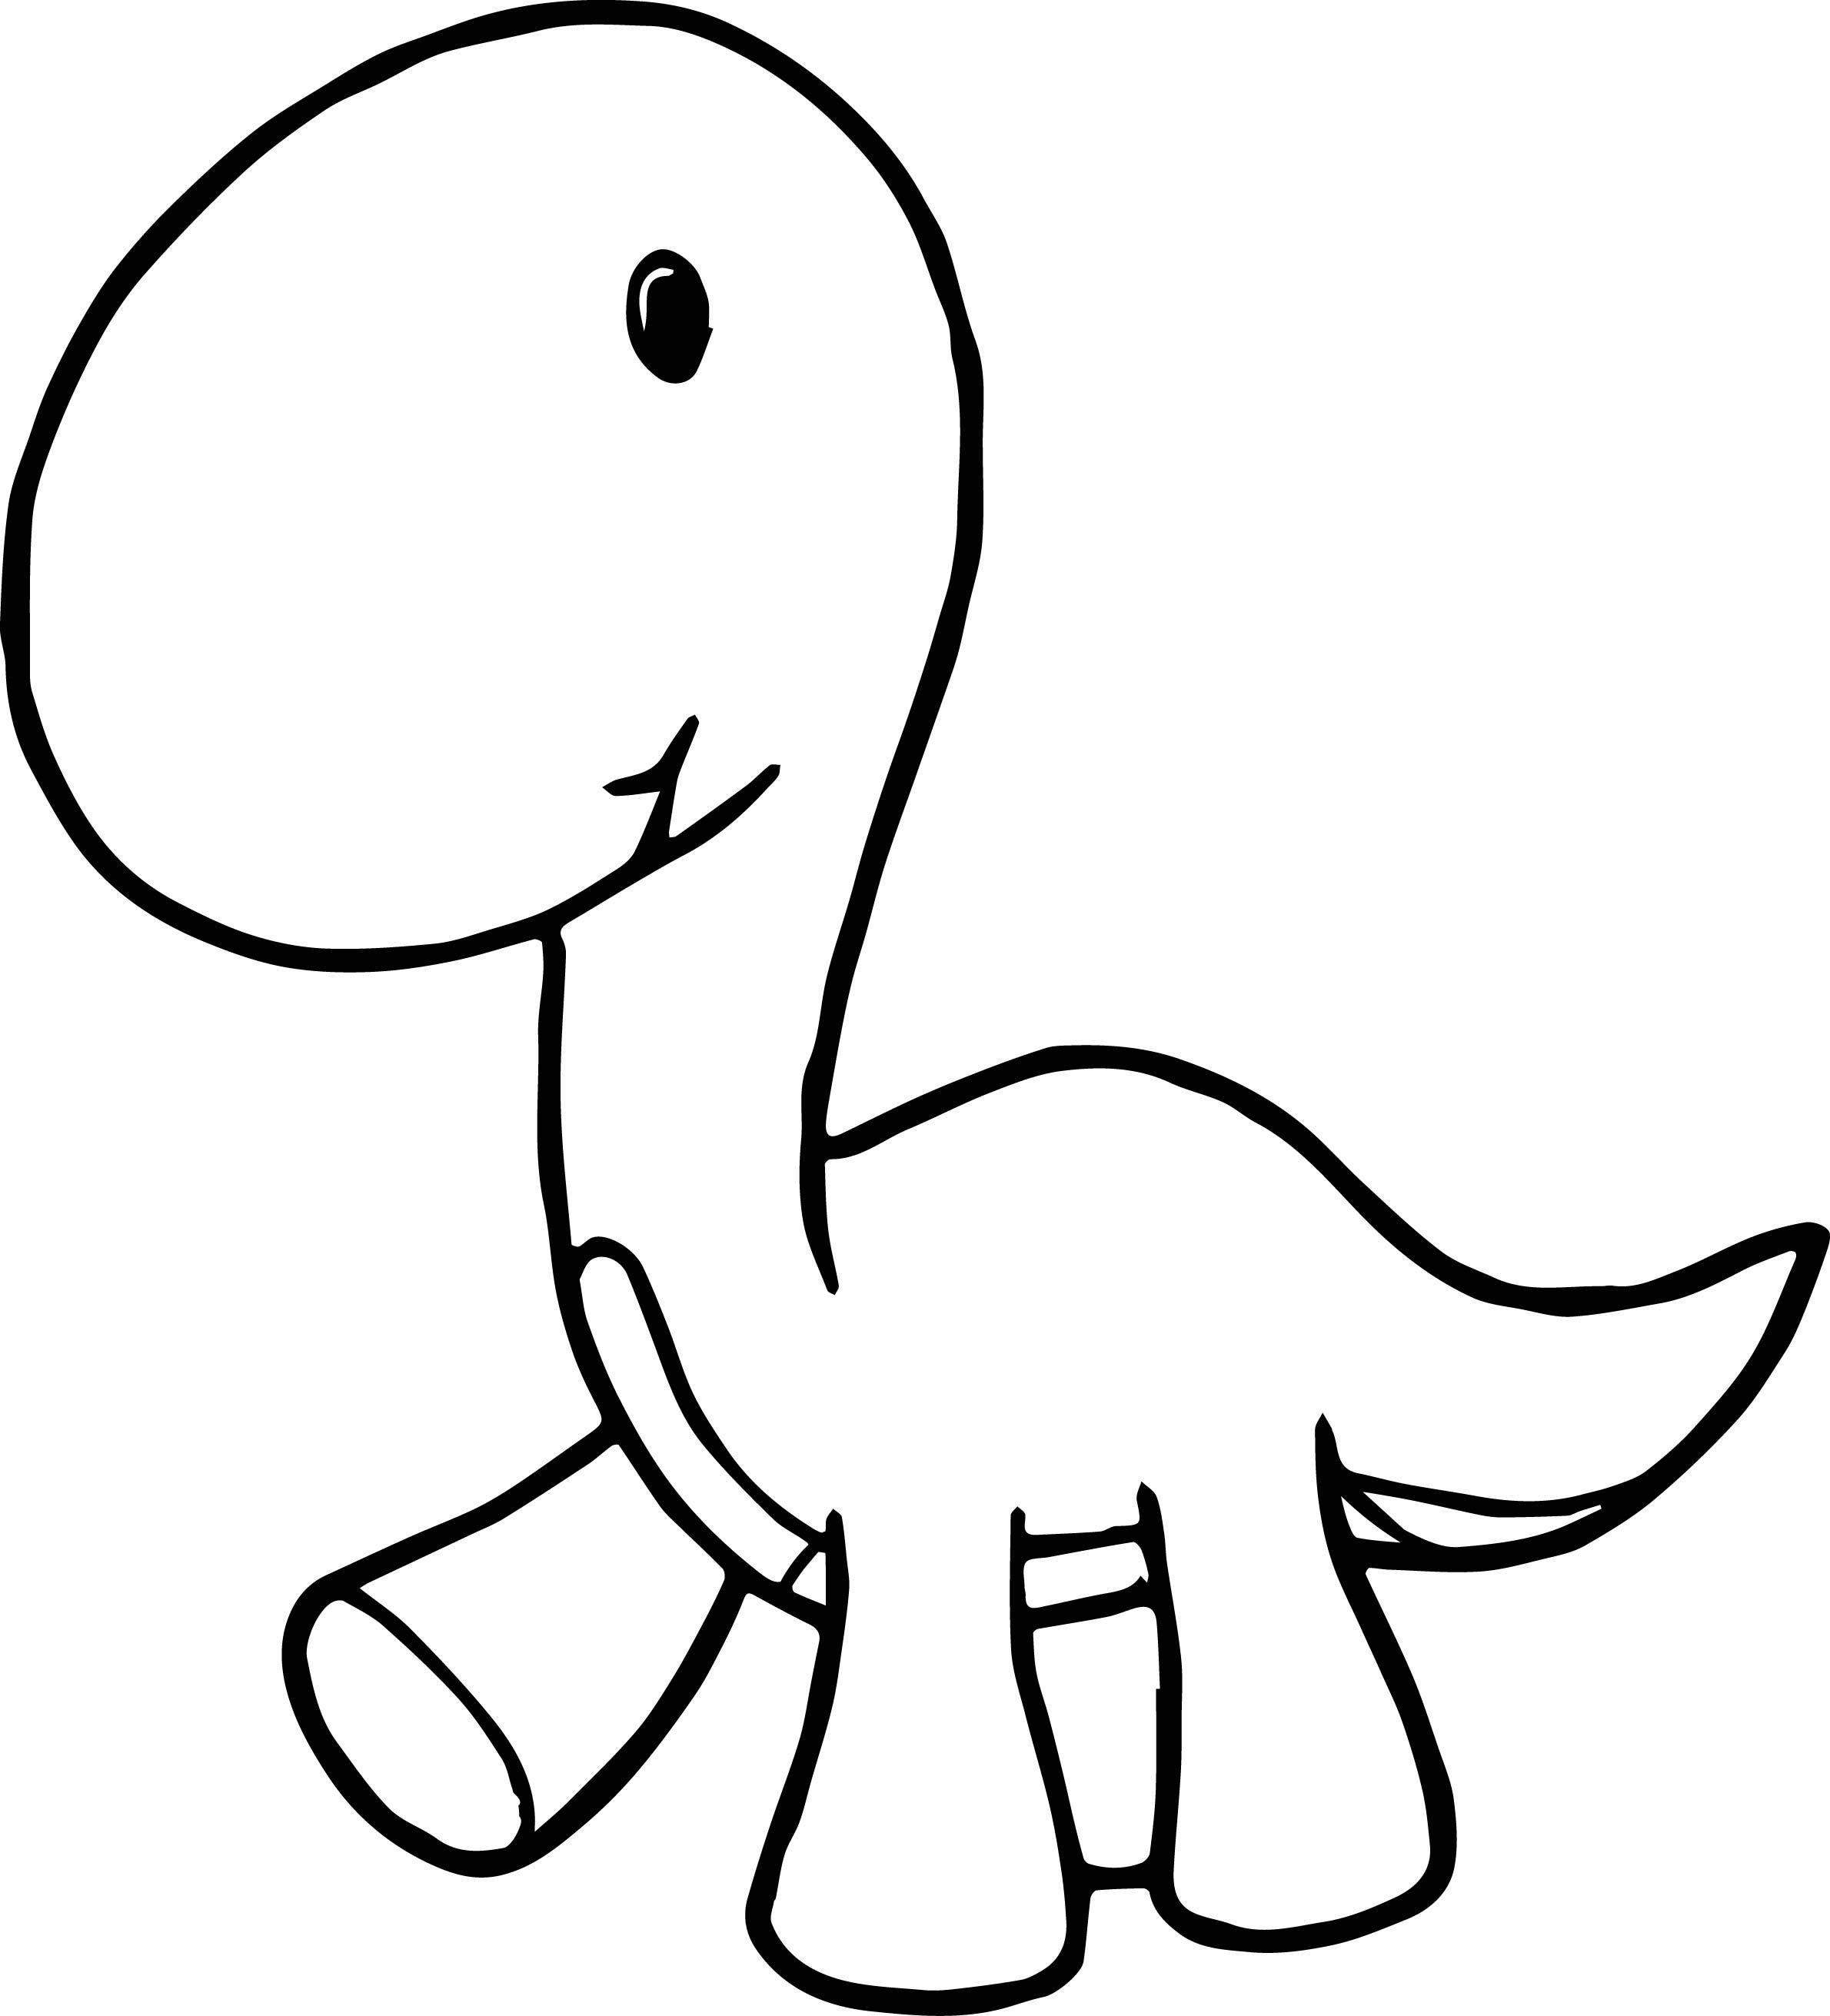 32+ Easy Cute Dinosaur Coloring Pages Background COLORIST